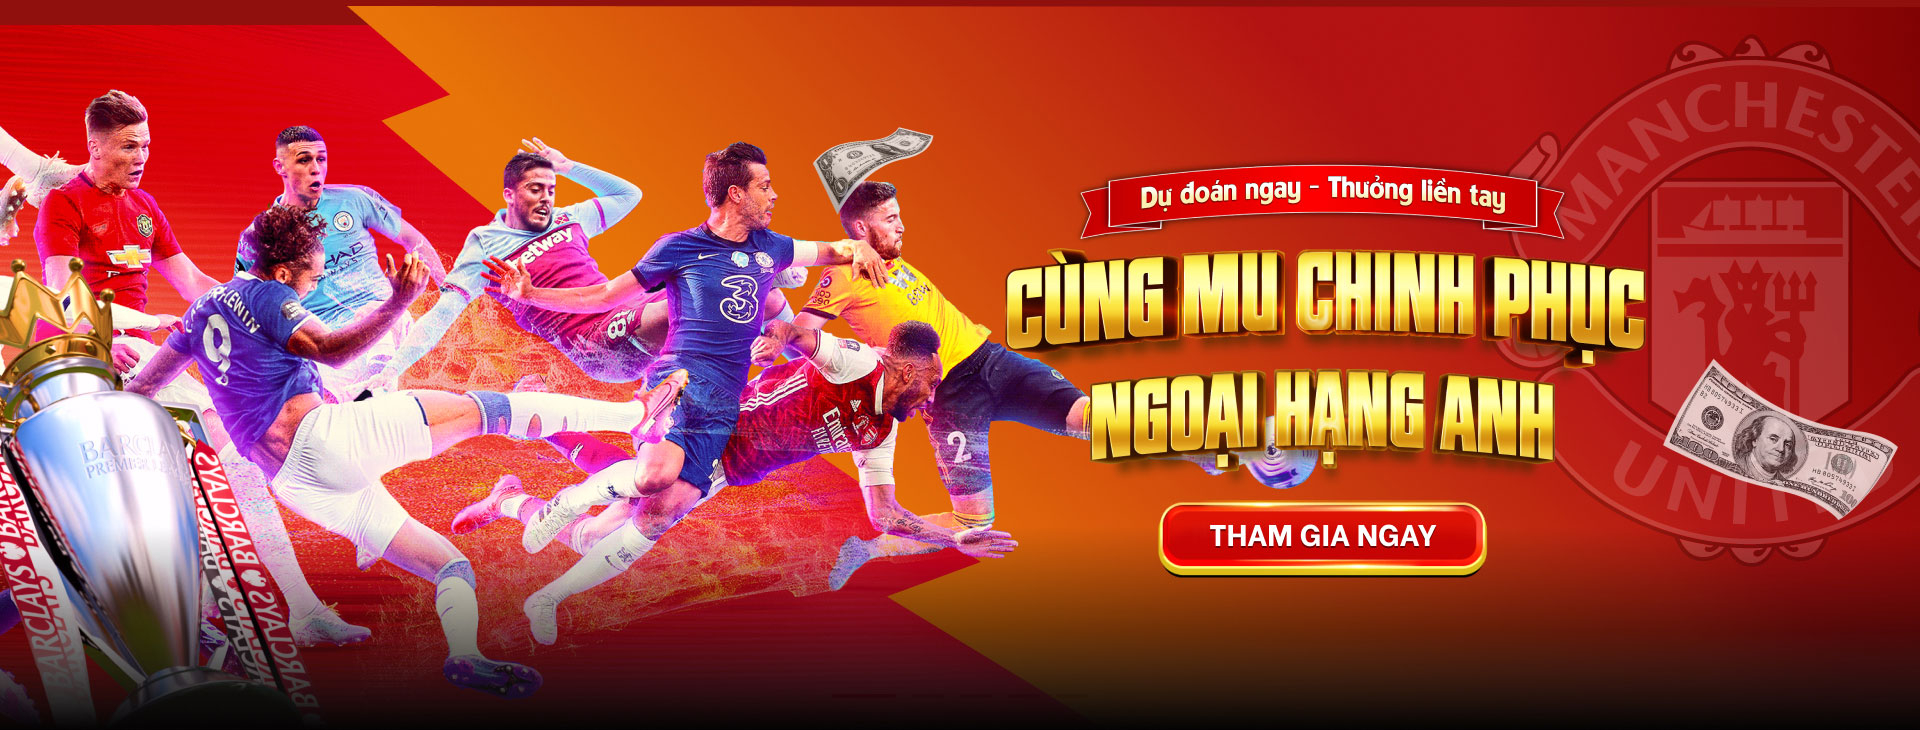 Event Ngoại Hạng Anh